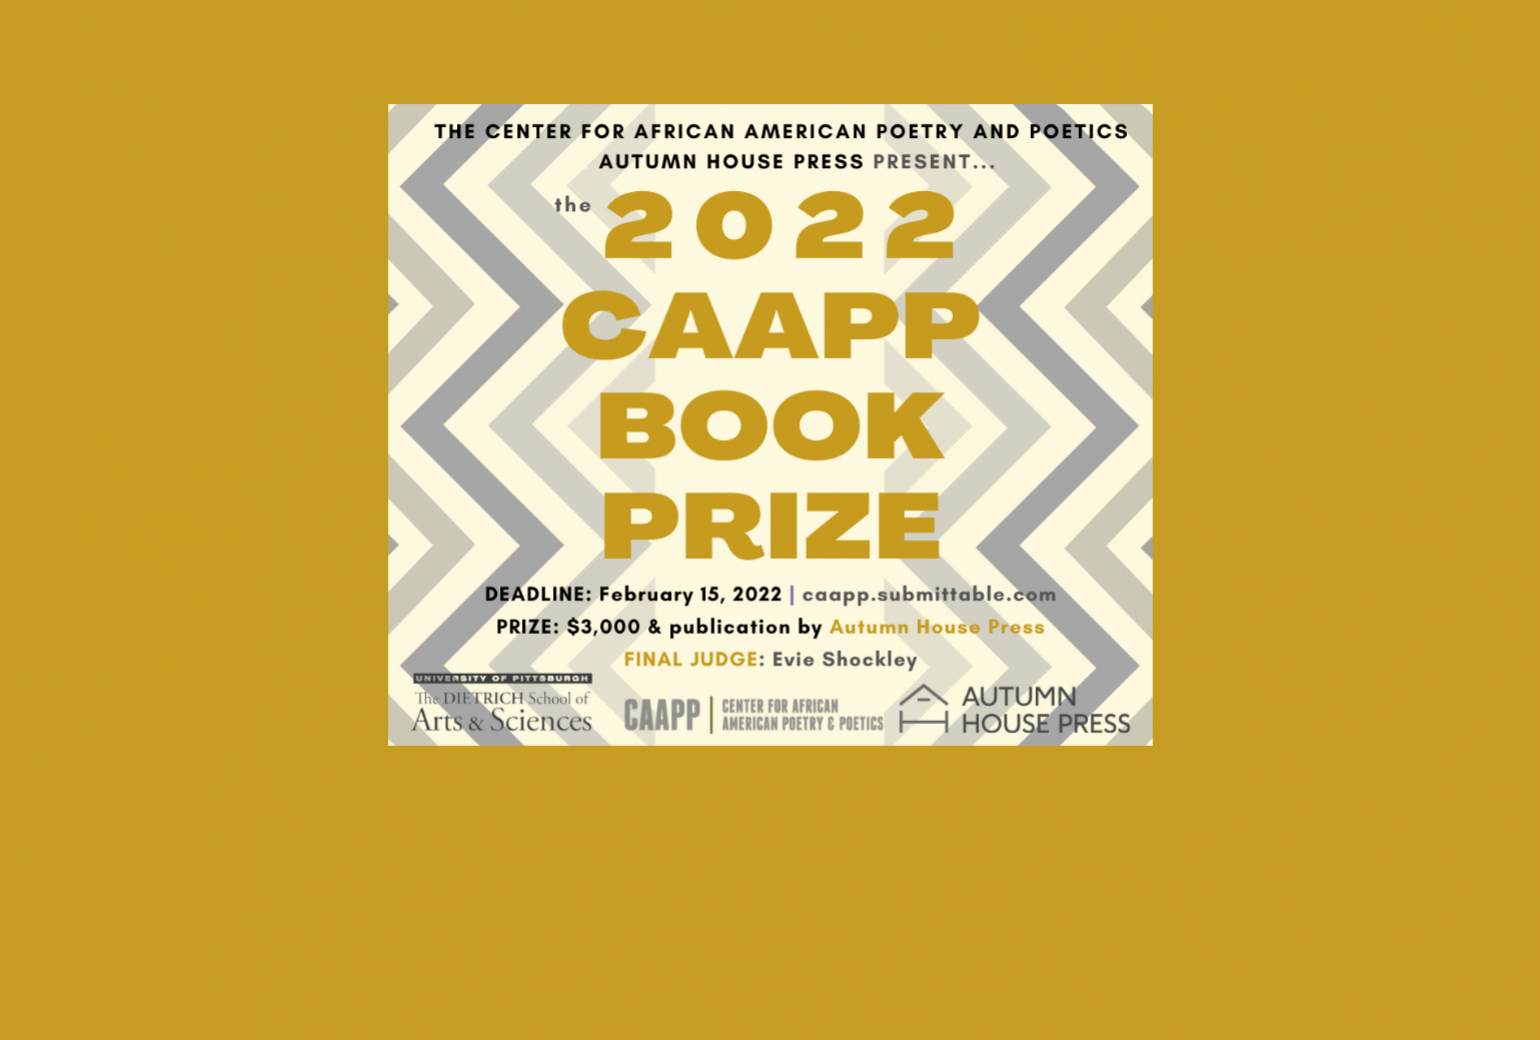 2022 CAAPP Book Prize. Deadline, February 15, 2022. Prize: $3,000 and publication by Autumn House Press. Final Judge: Evie Shockley.